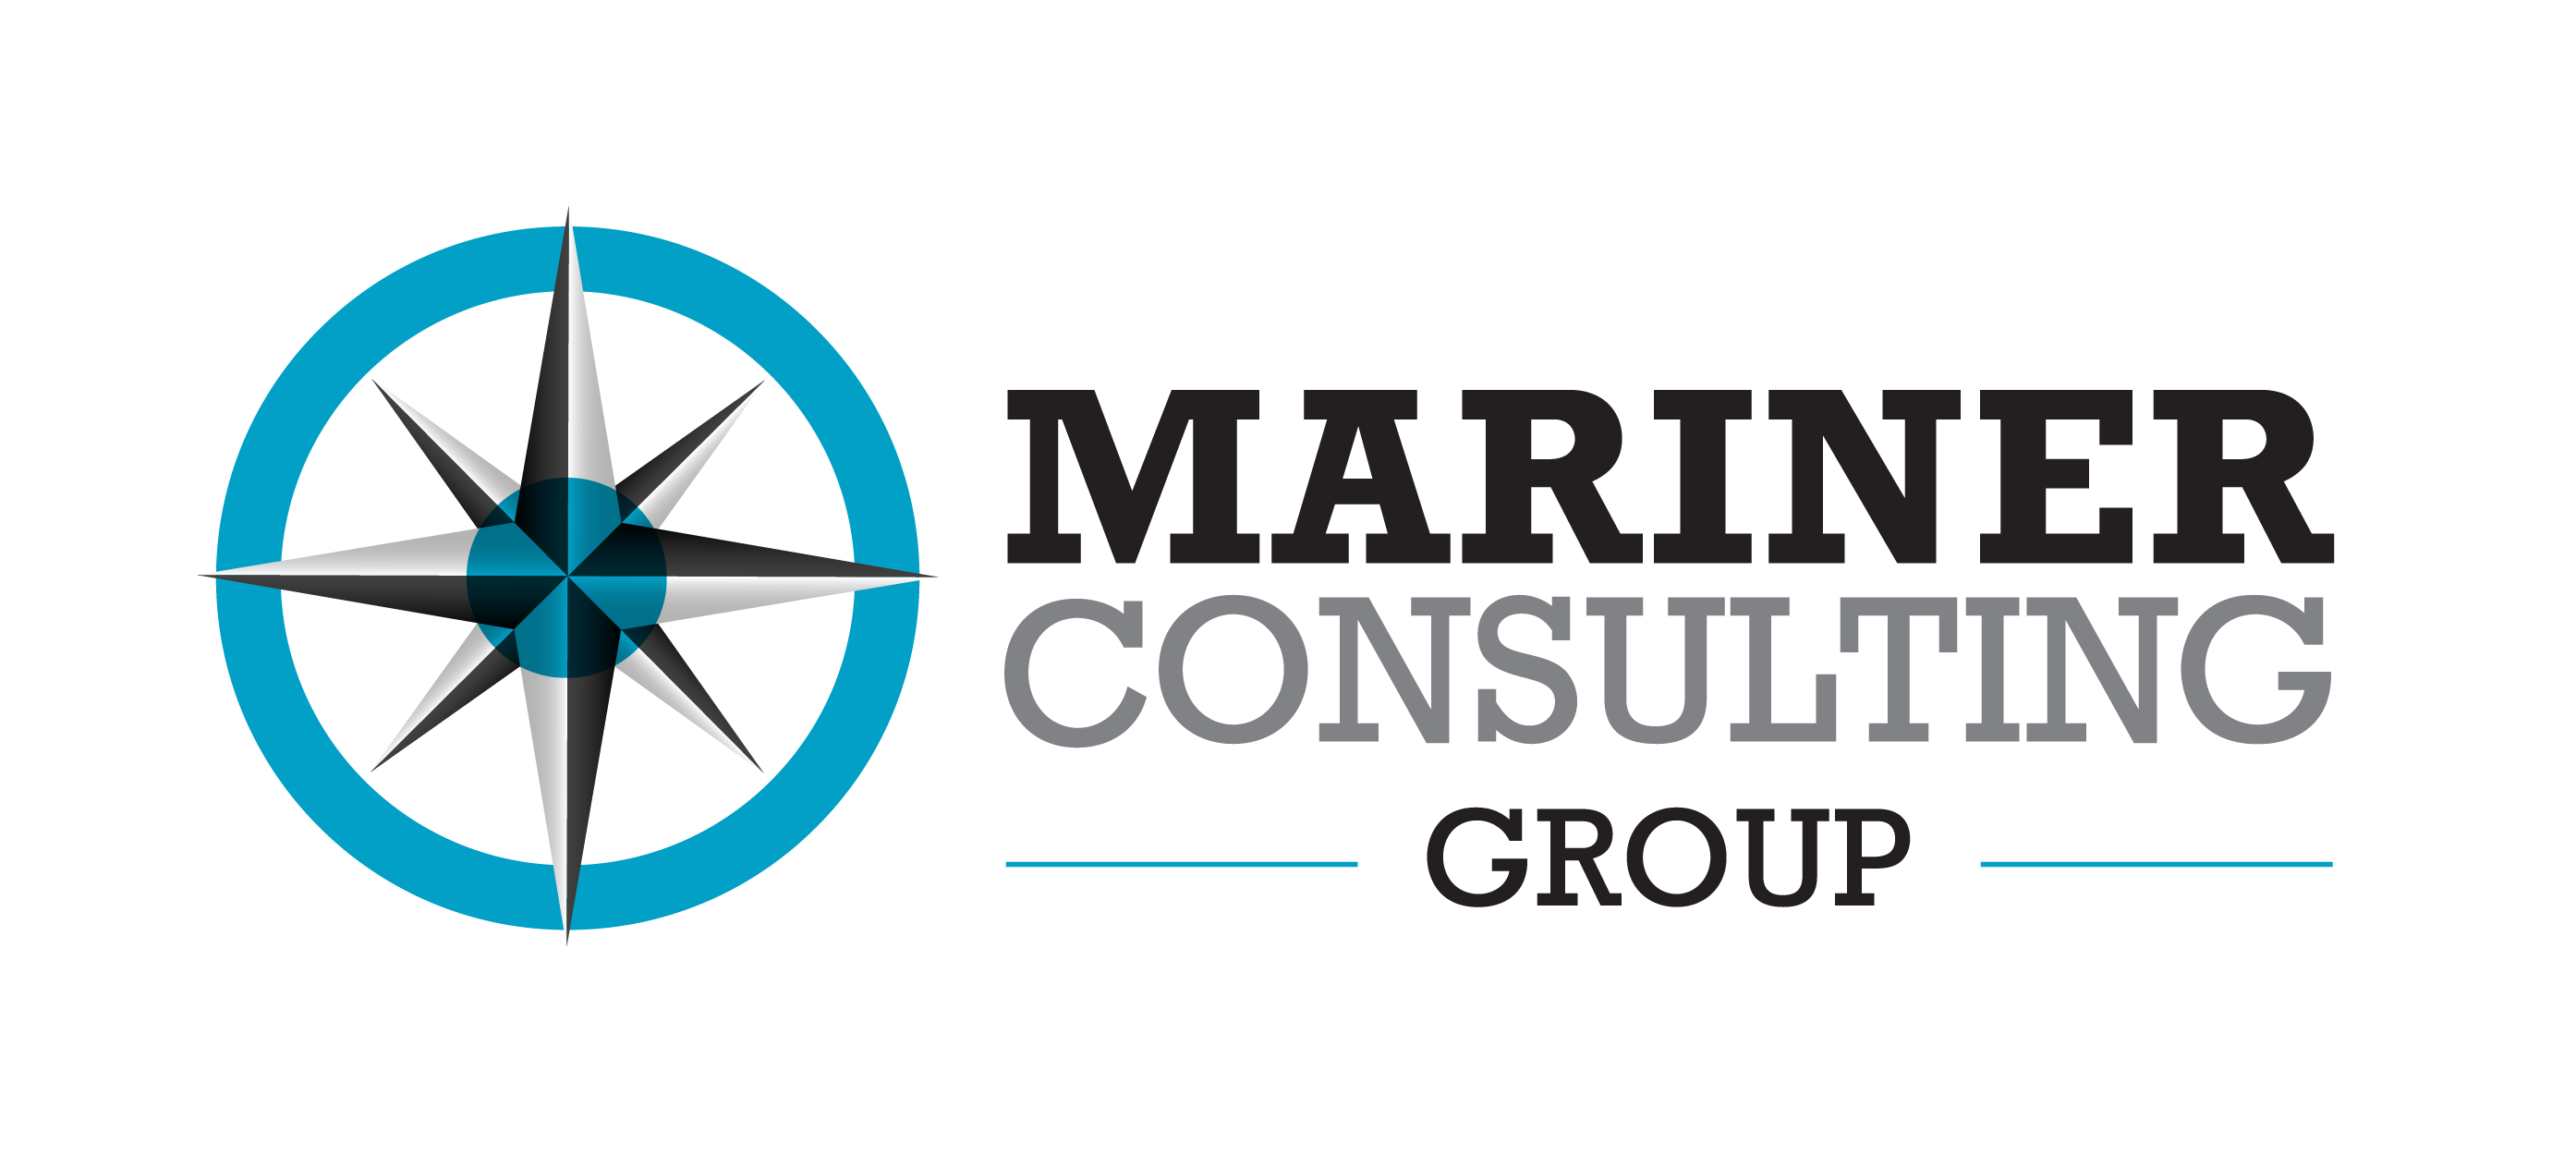 Mariner Consulting Group Logo